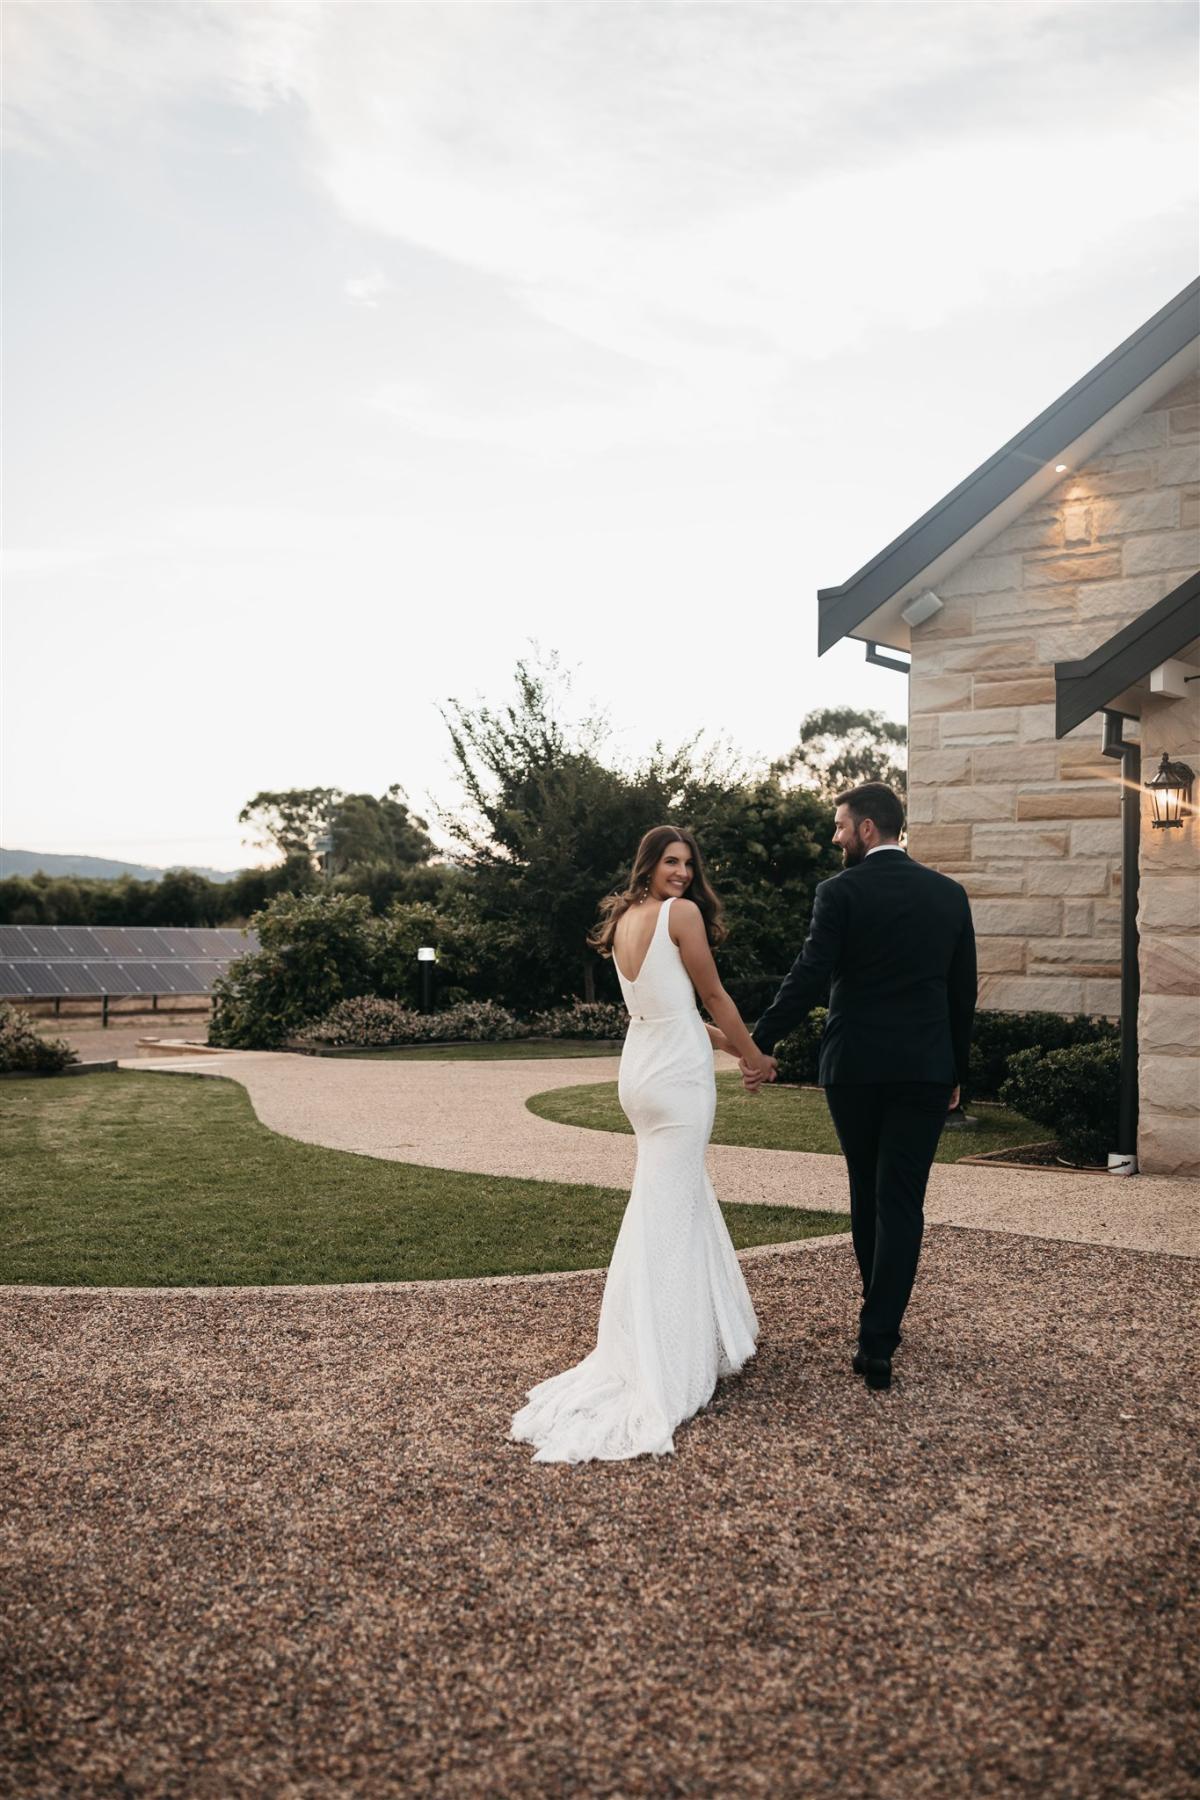 Lorissa & Recce-Rylie-WILD HEARTS collection - Bride and groom seen holding hands, while bride looks gorgeous in our Rylie Gown